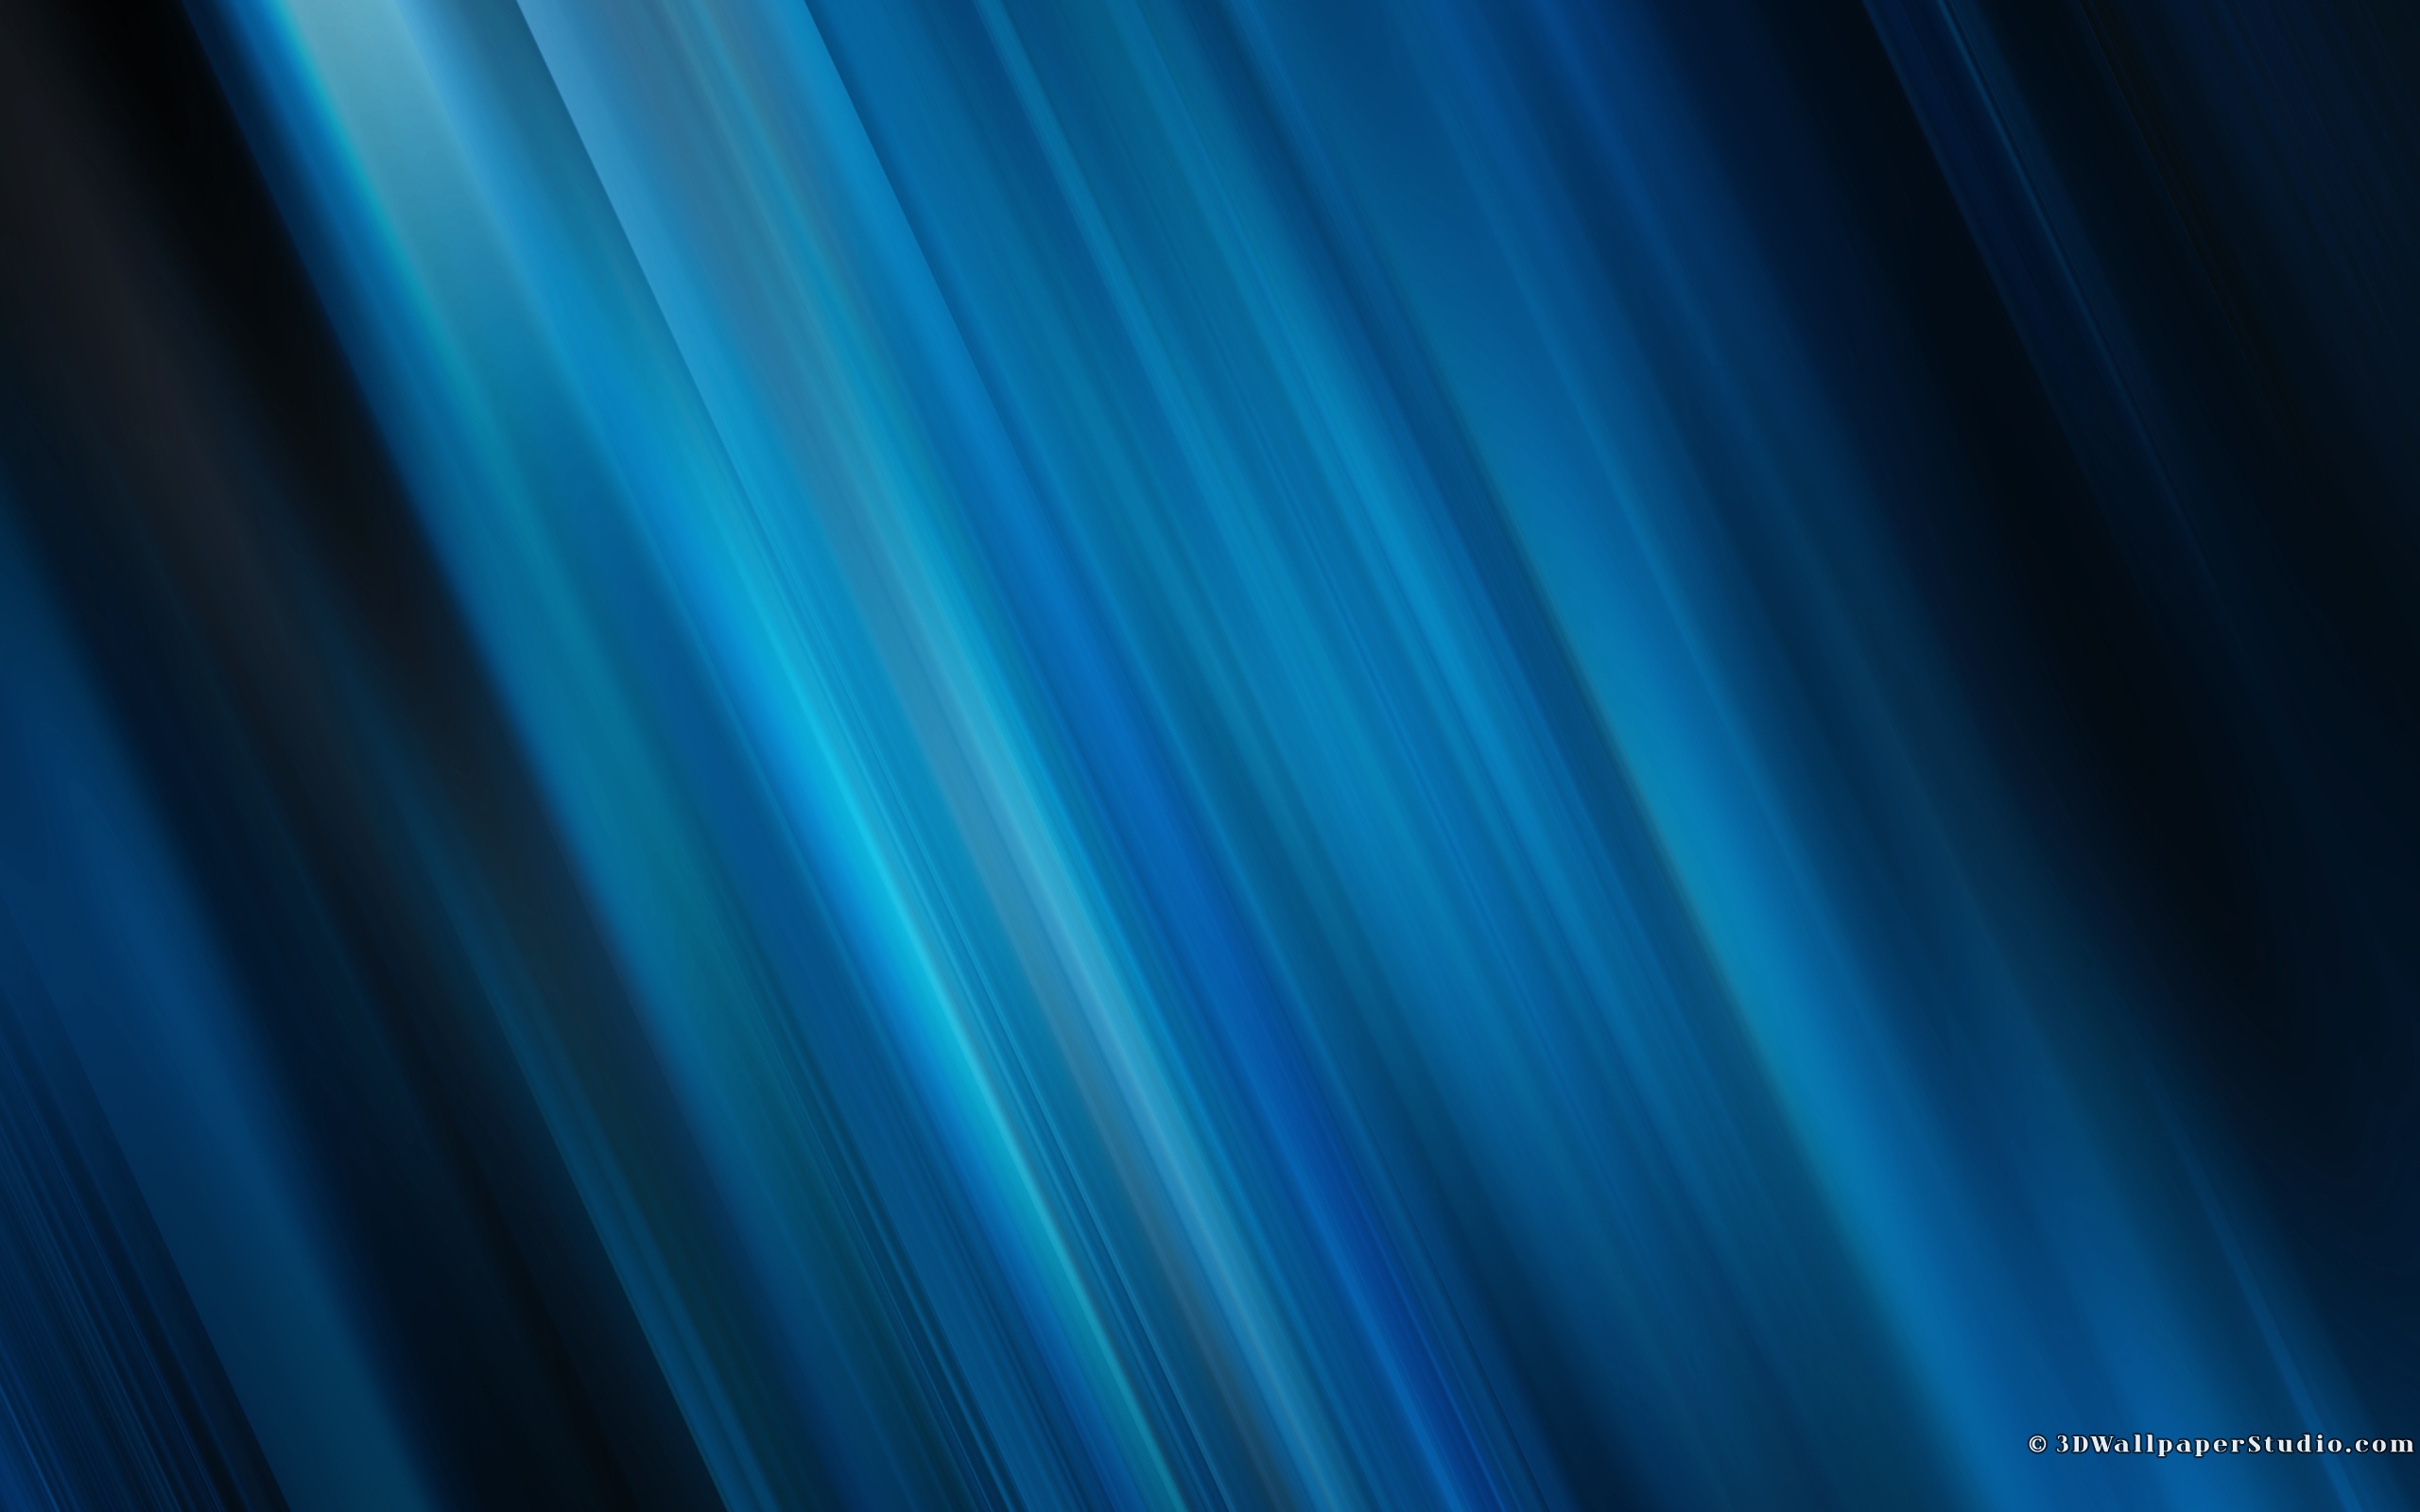 Awesome blue backgrounds